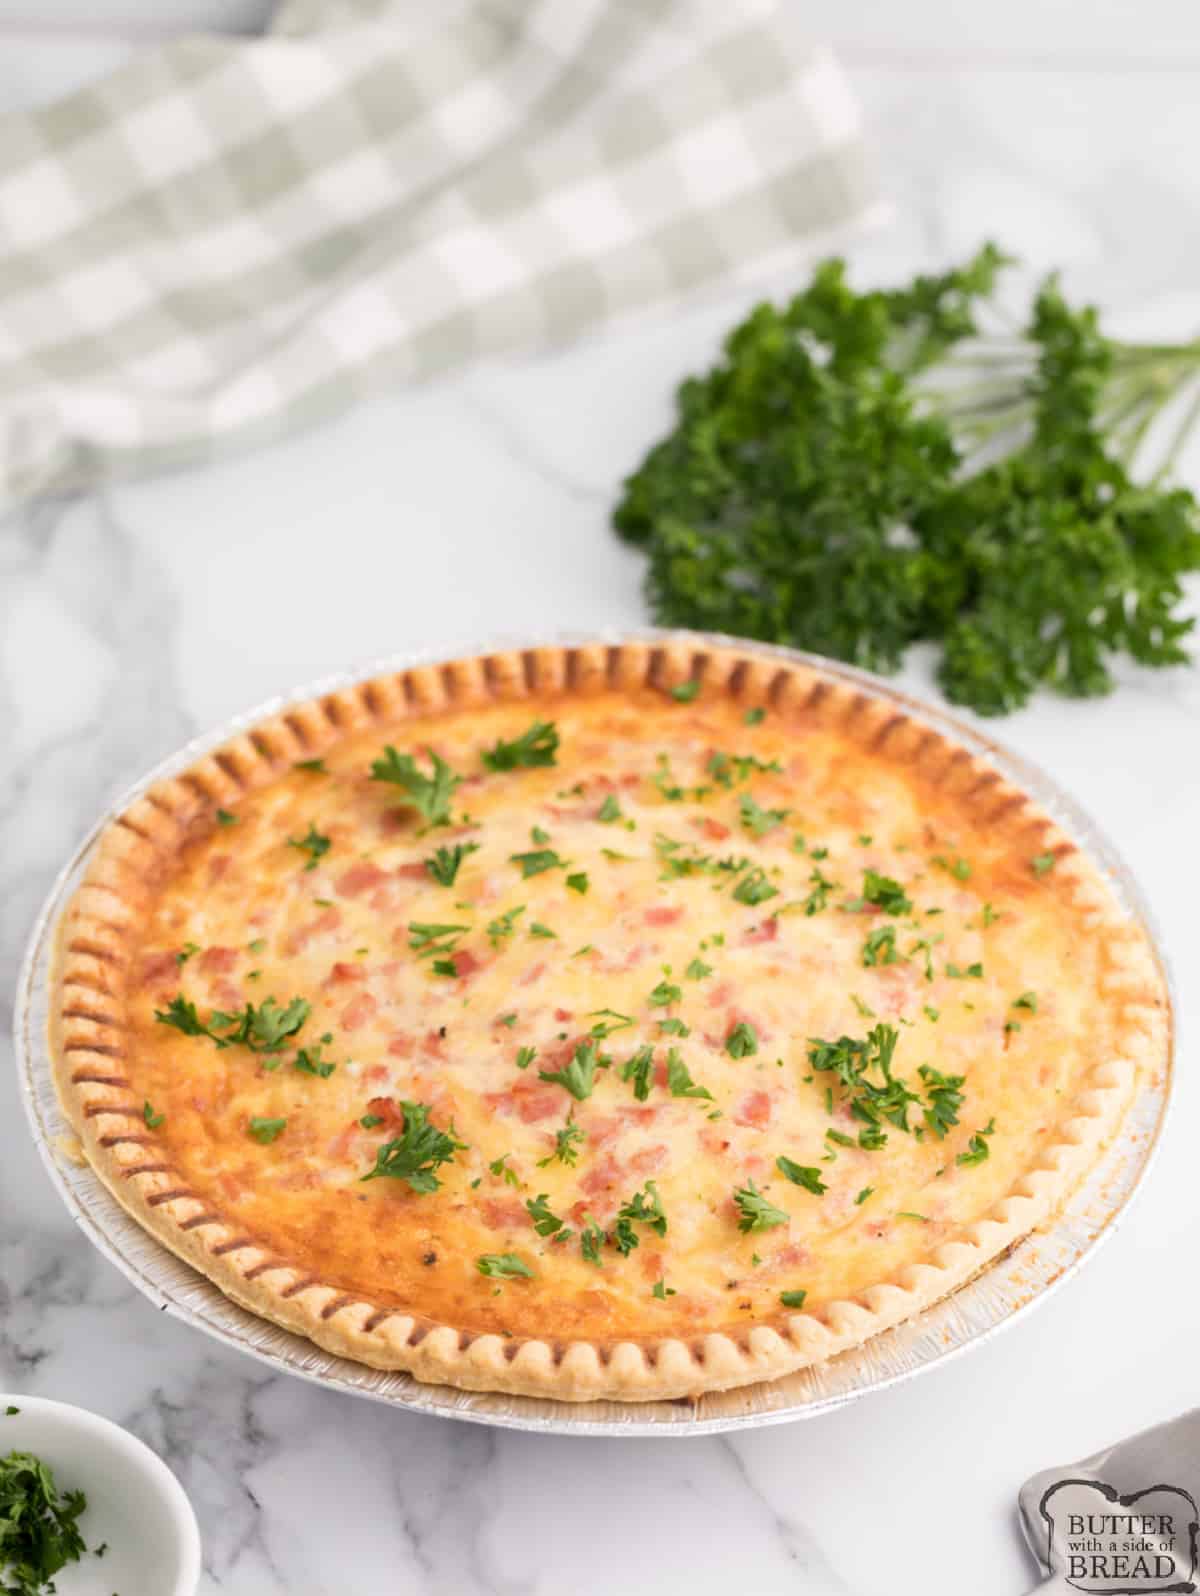 Ham and Cheese Quiche is made with a simple pie crust, eggs, ham, cheese and milk. Only 10 minutes of prep for this delicious quiche recipe that is perfect for brunch or breakfast. 